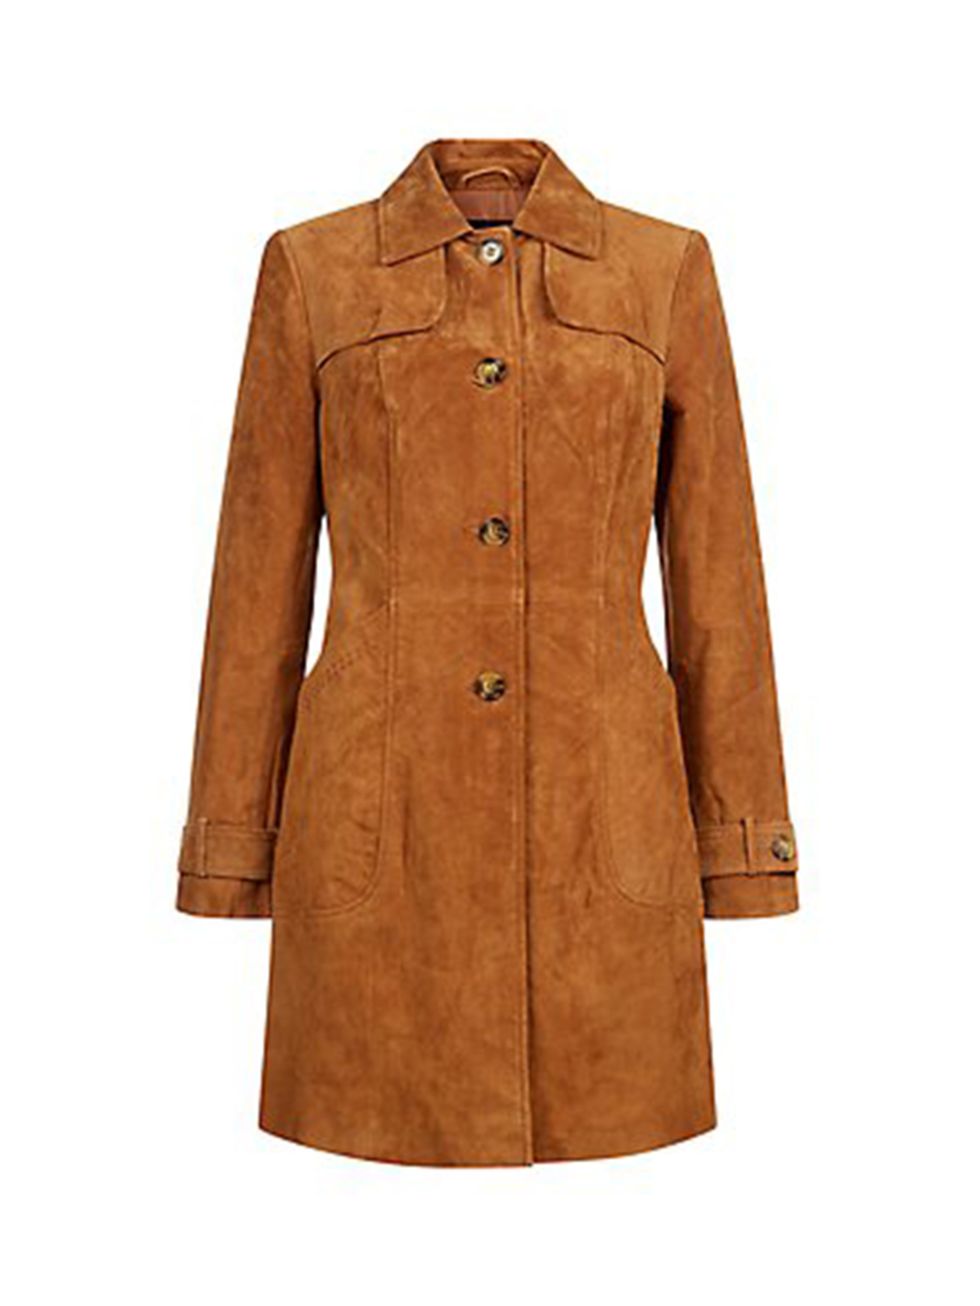 <p>70s style has been big news for a while now, and this AW15 is no different. Get your hands on suede coat for Autumn and layer over textured chunky jumpers in the Winter.</p>

<p> </p>

<p><a href="http://www.newlook.com/shop/womens/jackets-and-coats/ta